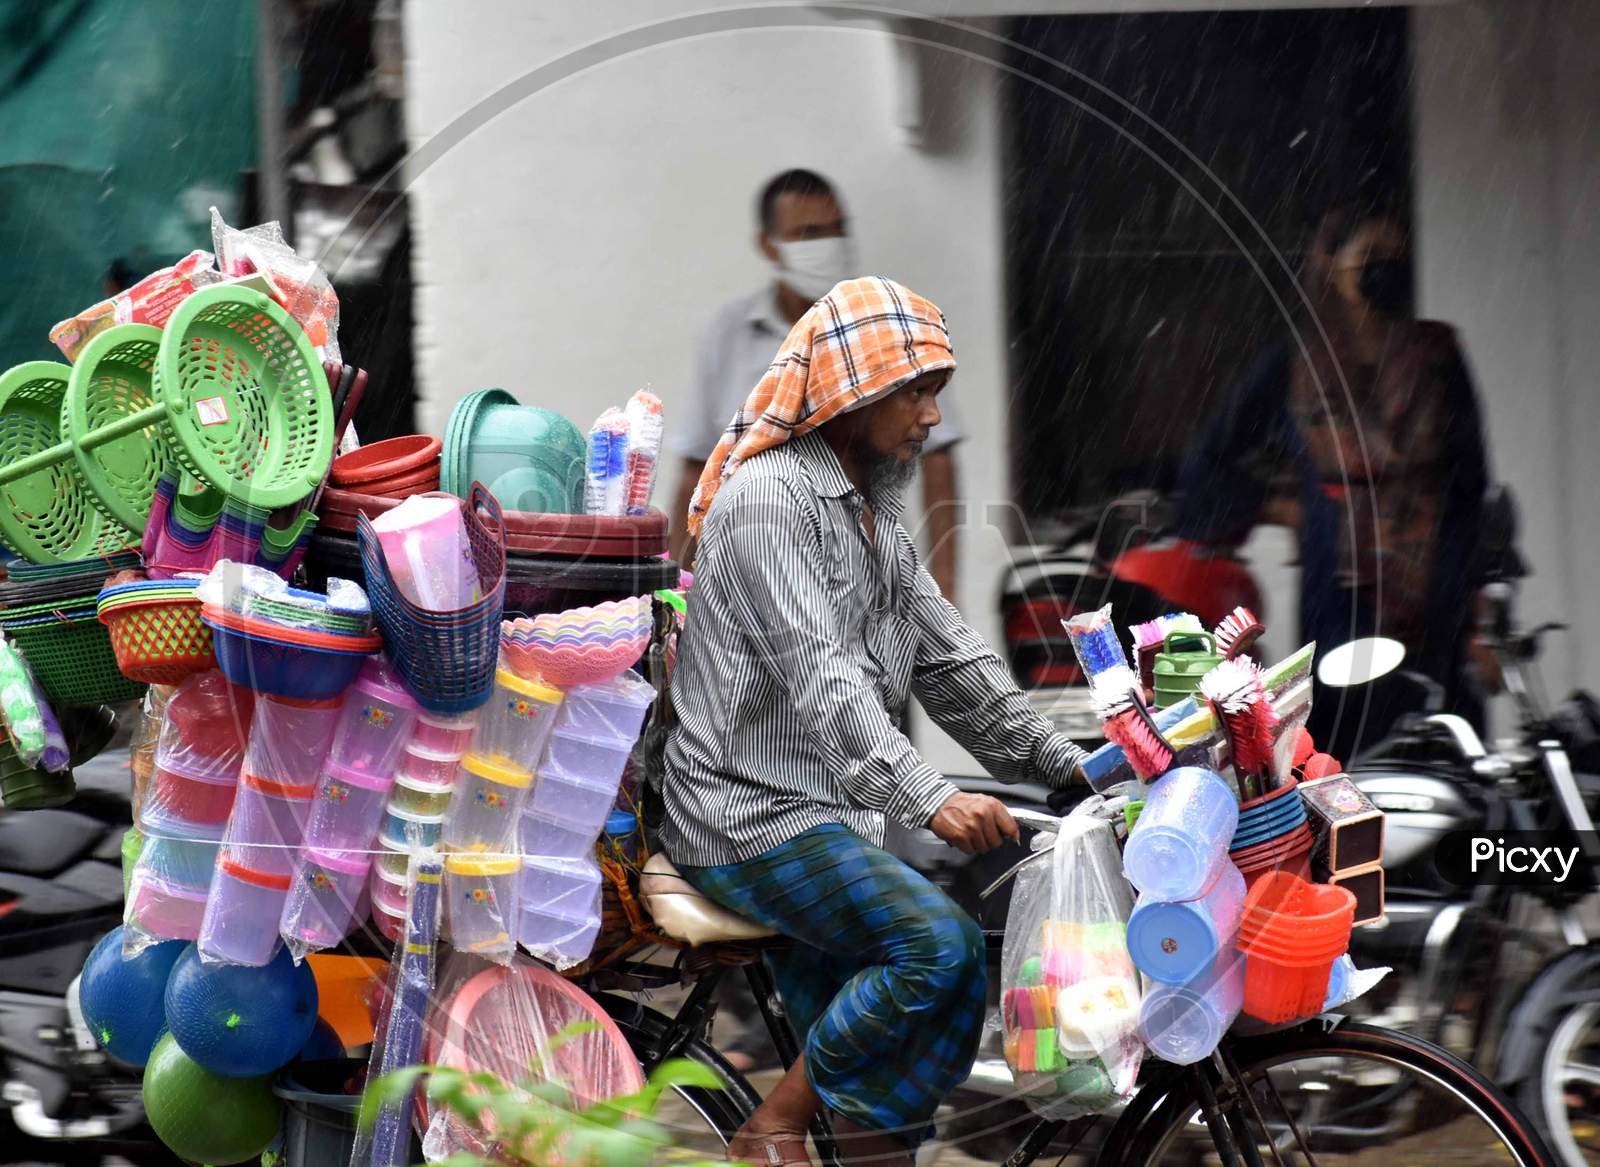 A vendor cycles on the road during heavy rain in Prayagraj, August 12, 2020.